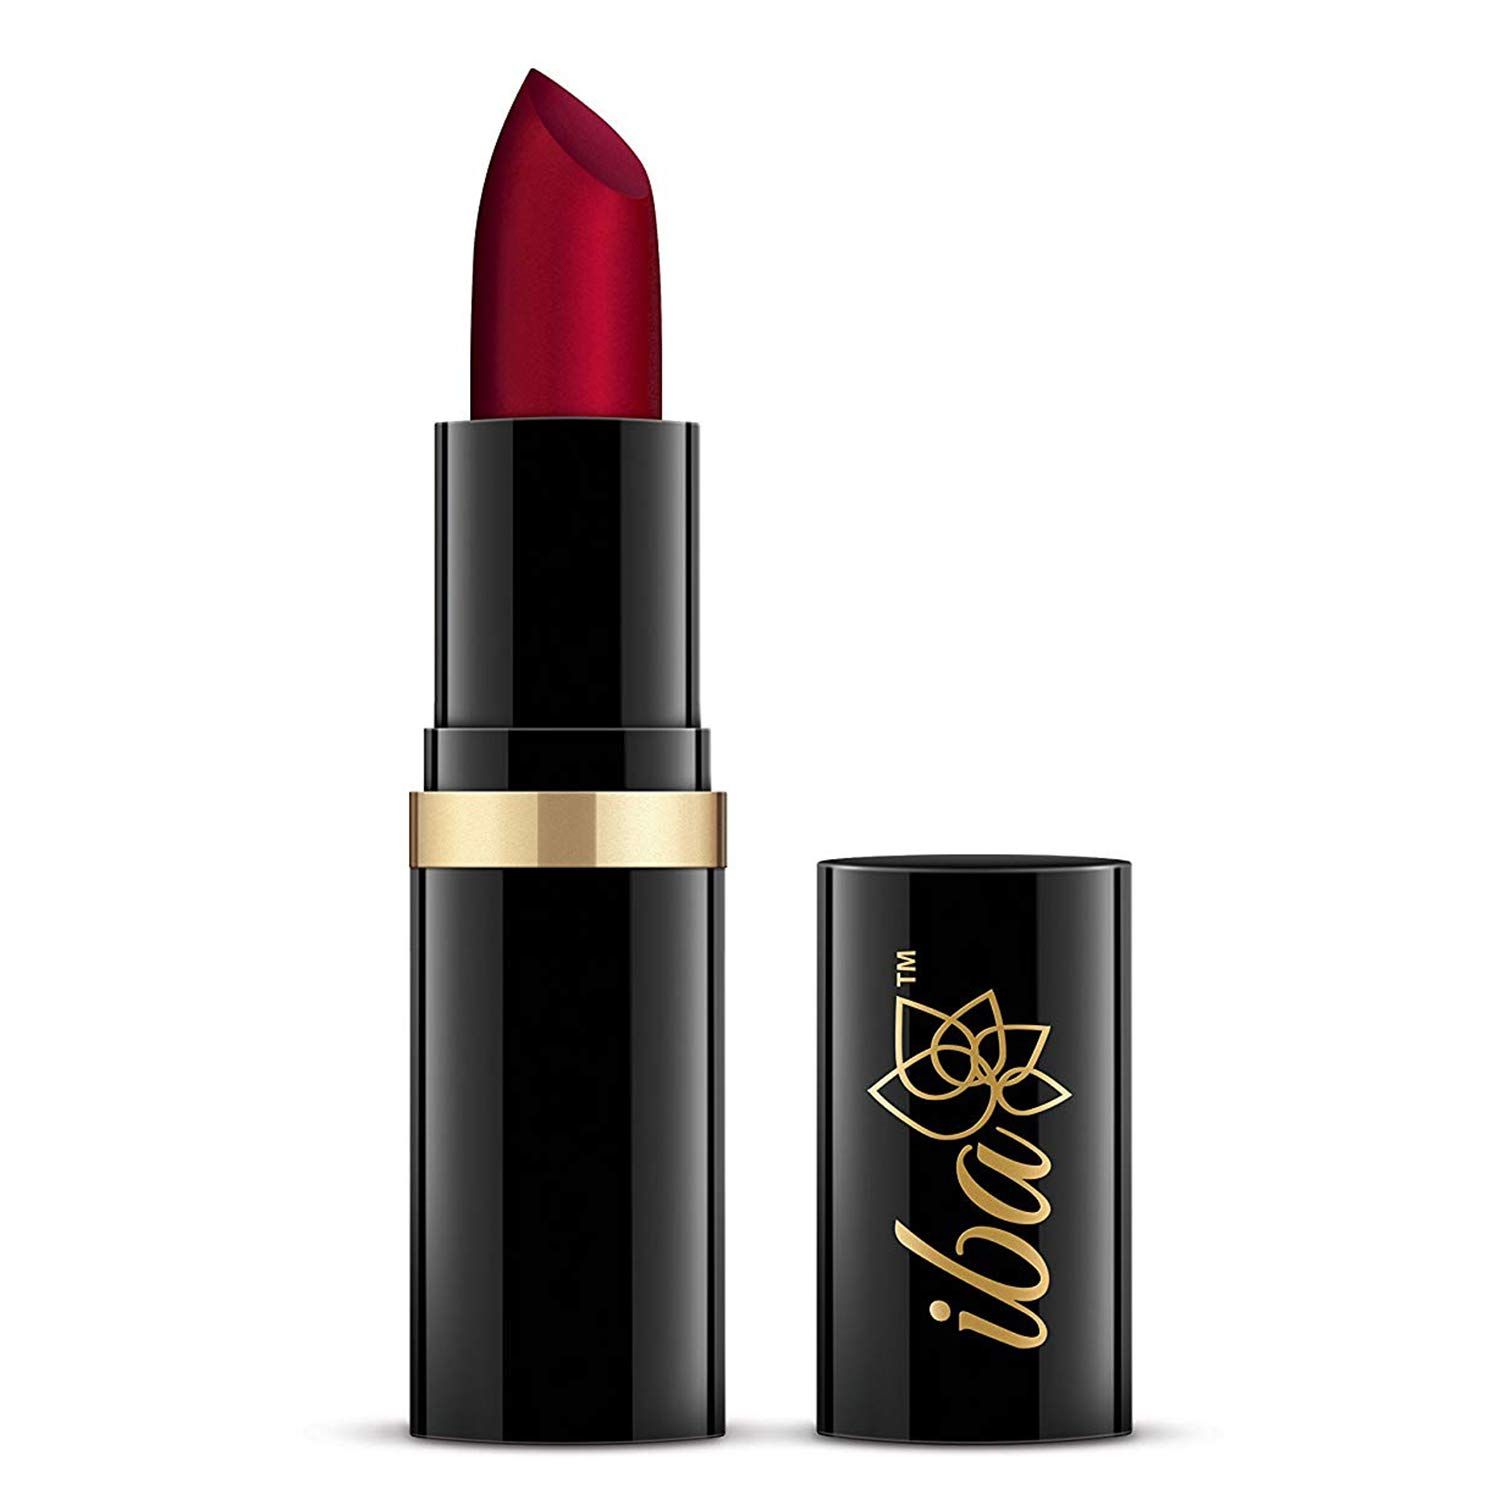 Buy Iba Halal Care Pure Lips Moisturizing Lipstick Shade A65 Ruby Touch (4 g) - Purplle